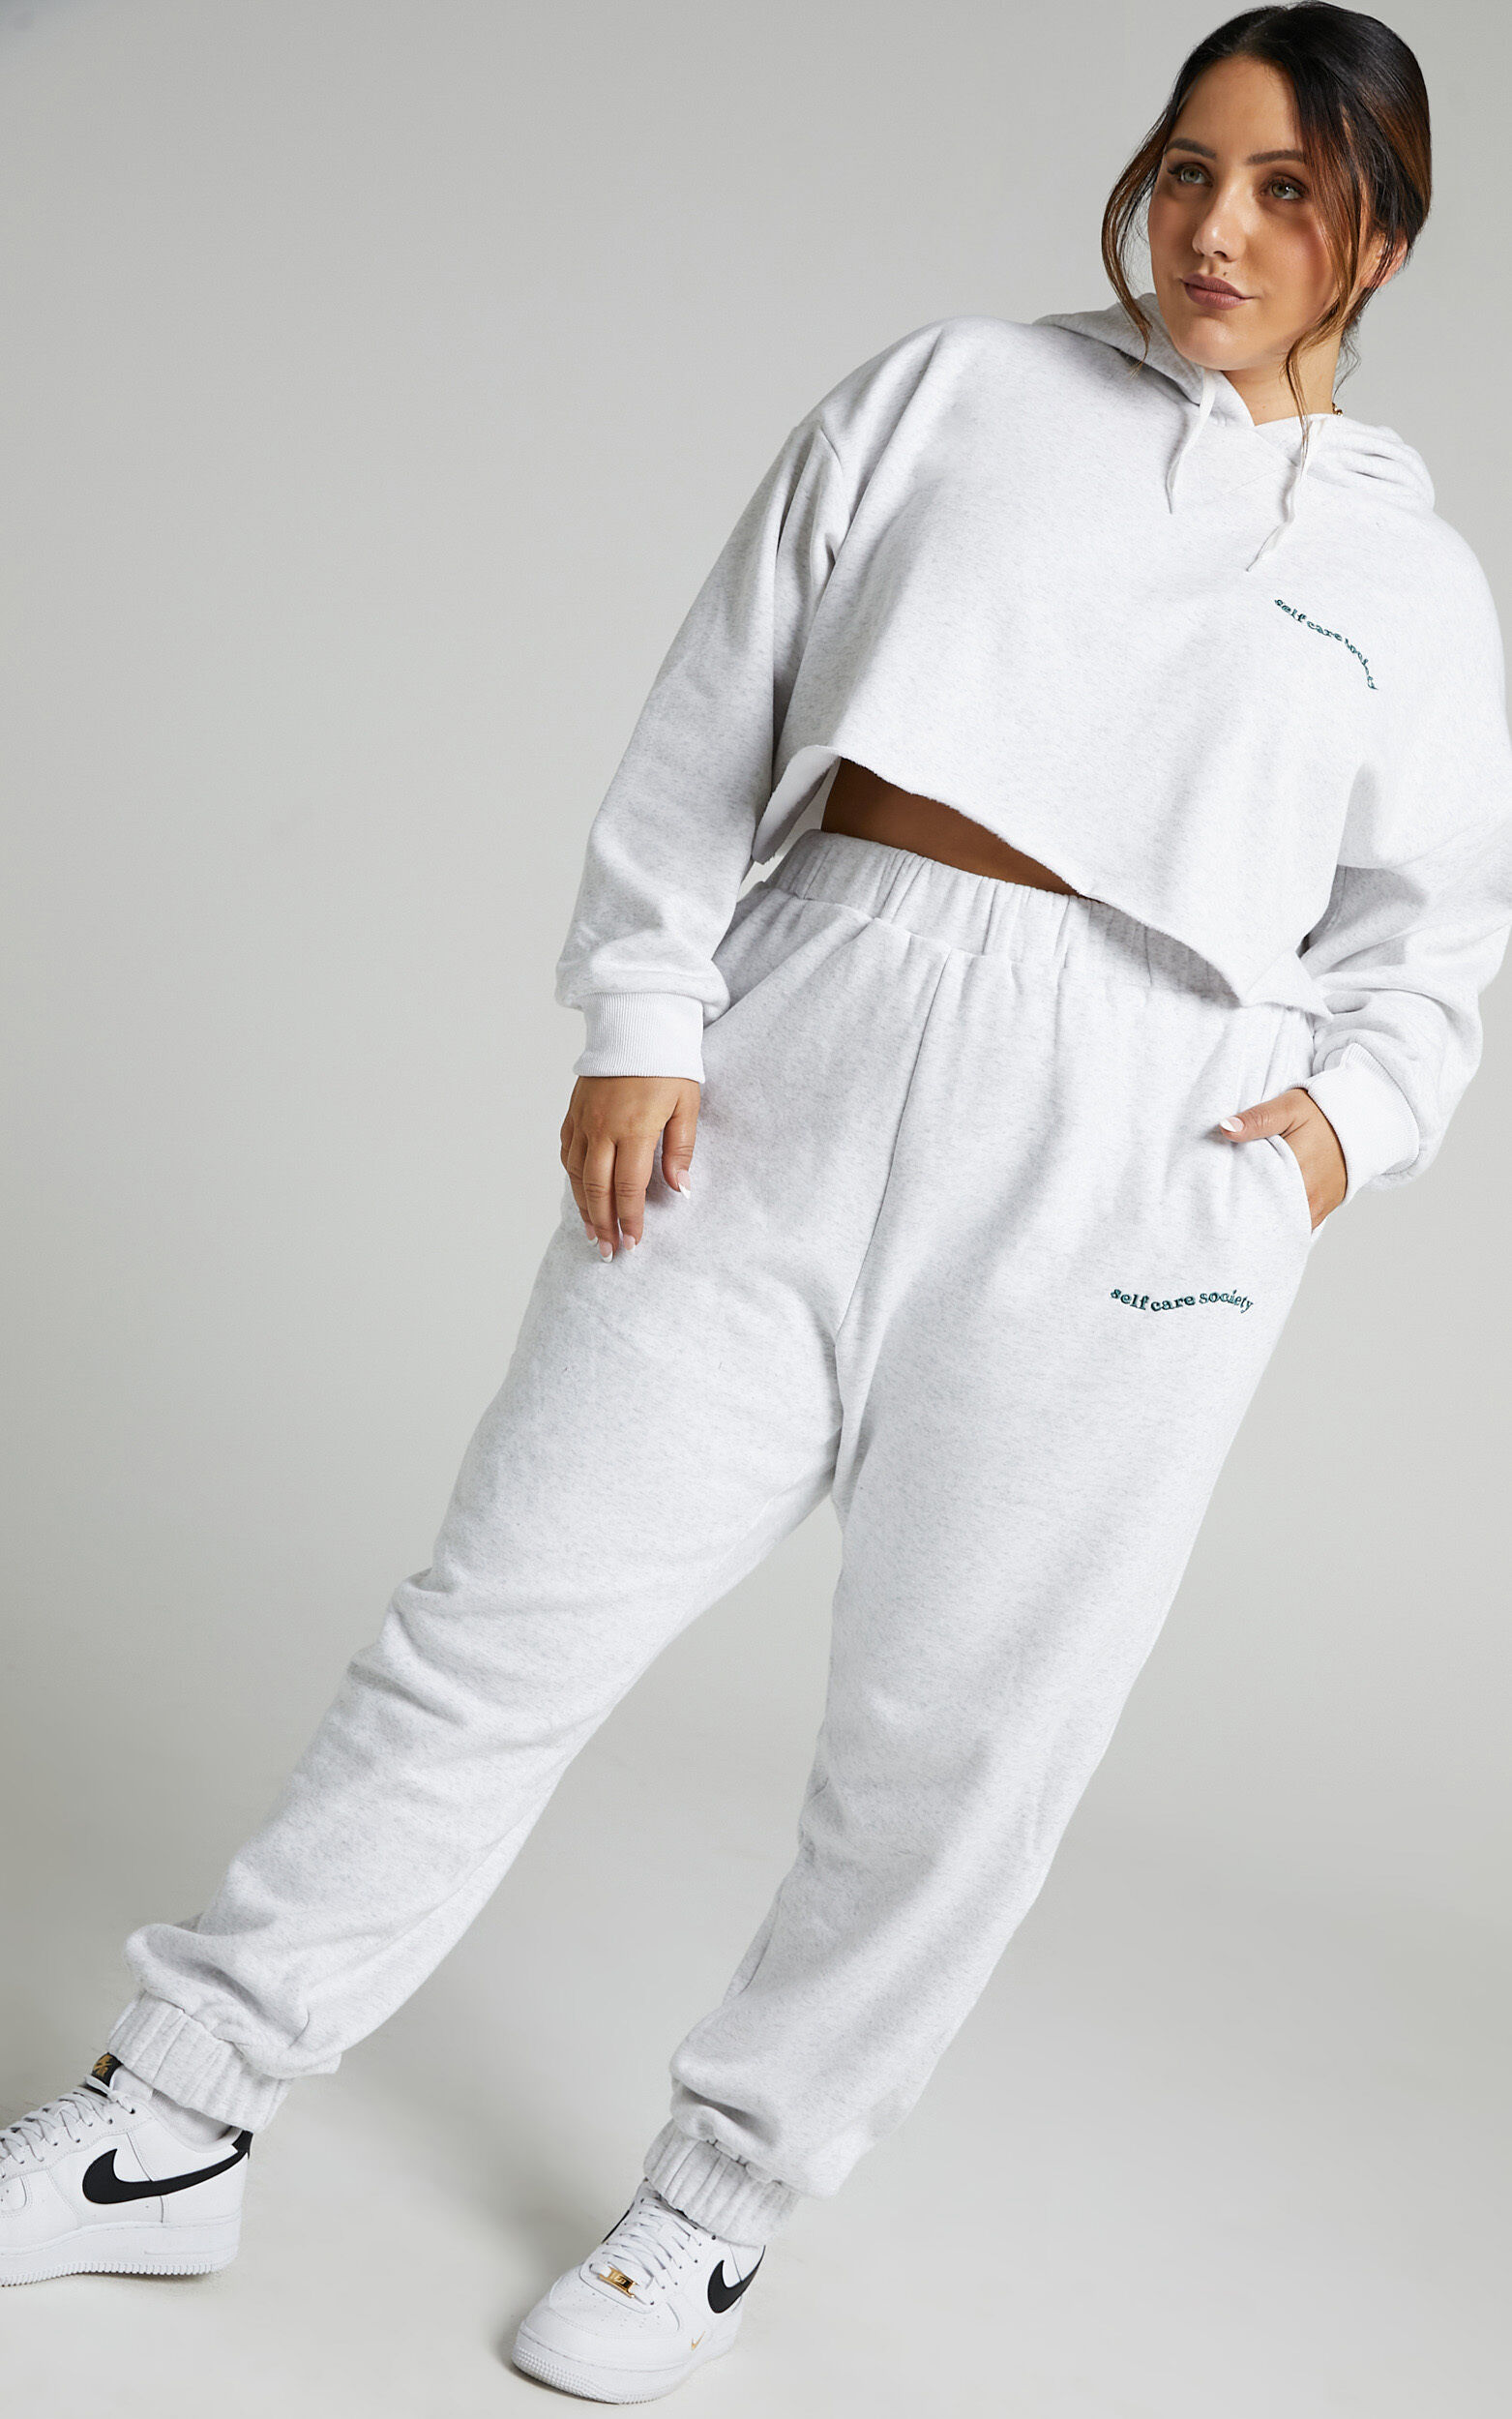 Sunday Society Club - Maddie Sweatpants in White Marle - 04, WHT6, super-hi-res image number null